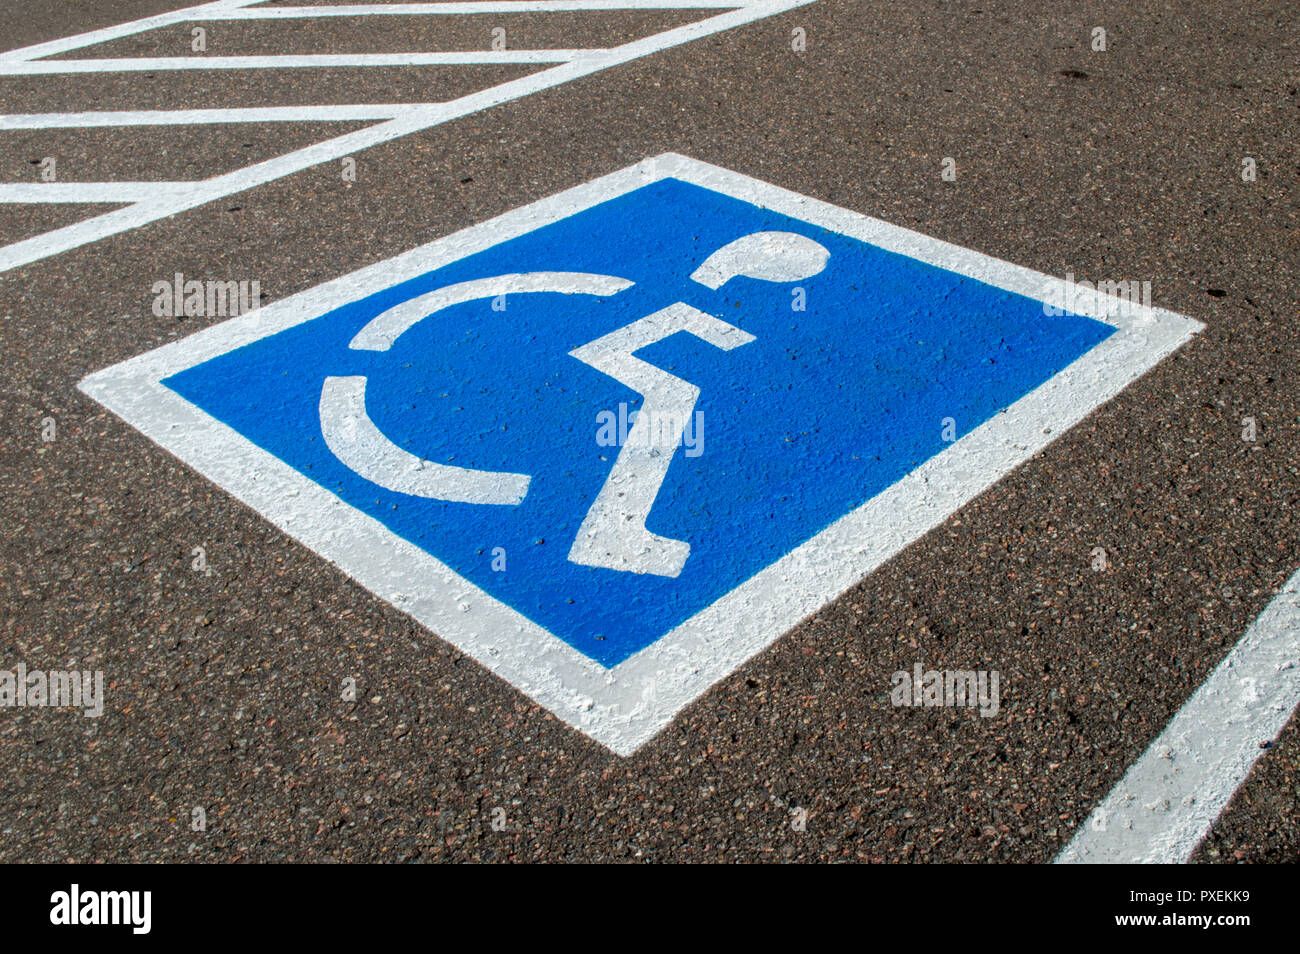 Handicapped parking spots with painted signs Stock Photo